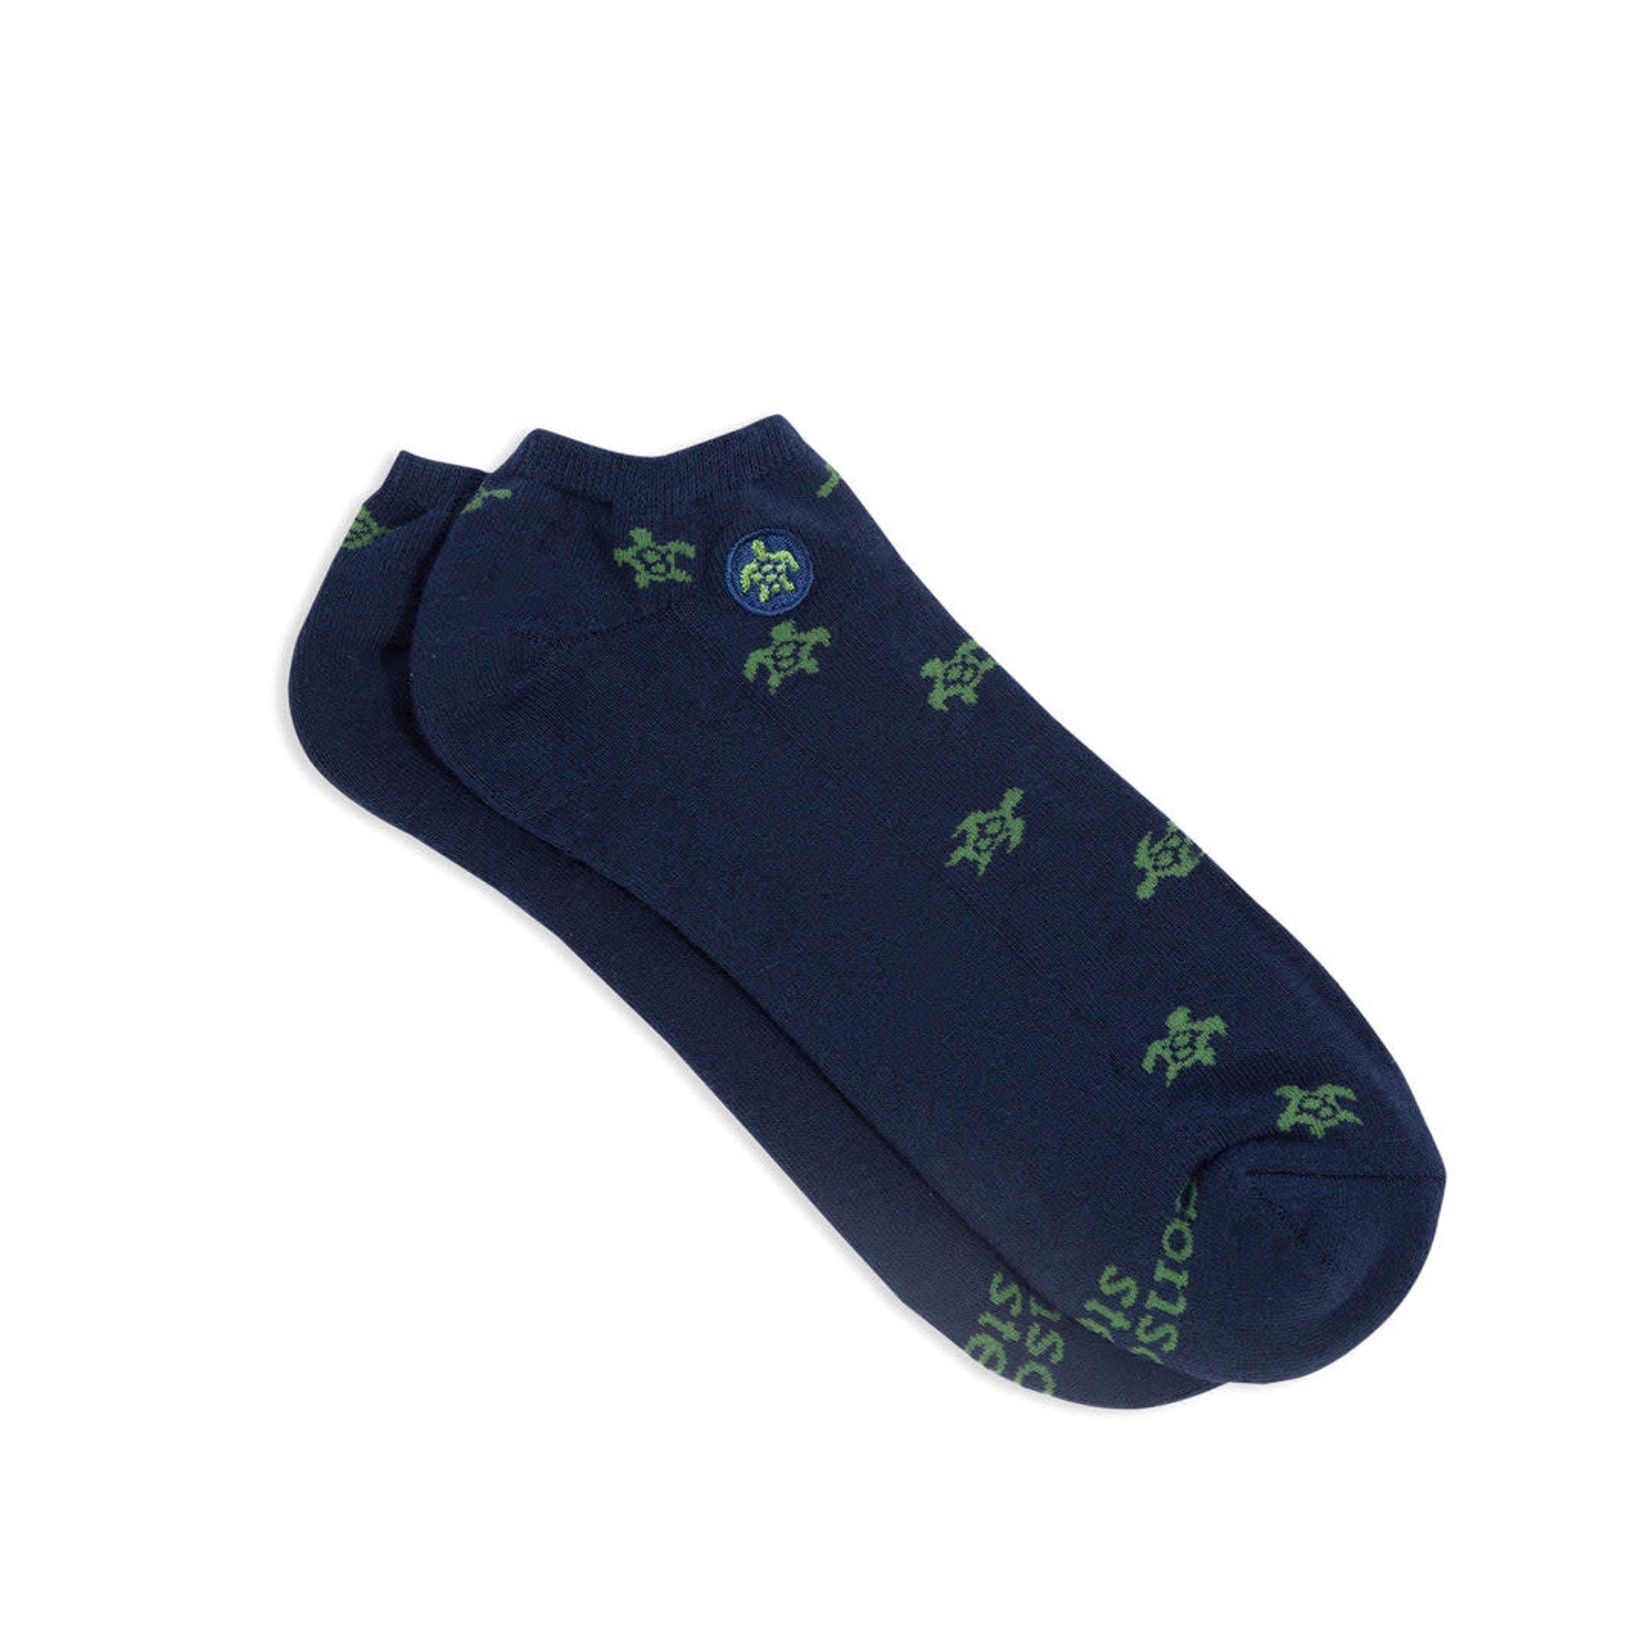 Conscious Step Conscious Step Socks that Protect Turtles Ankle Small